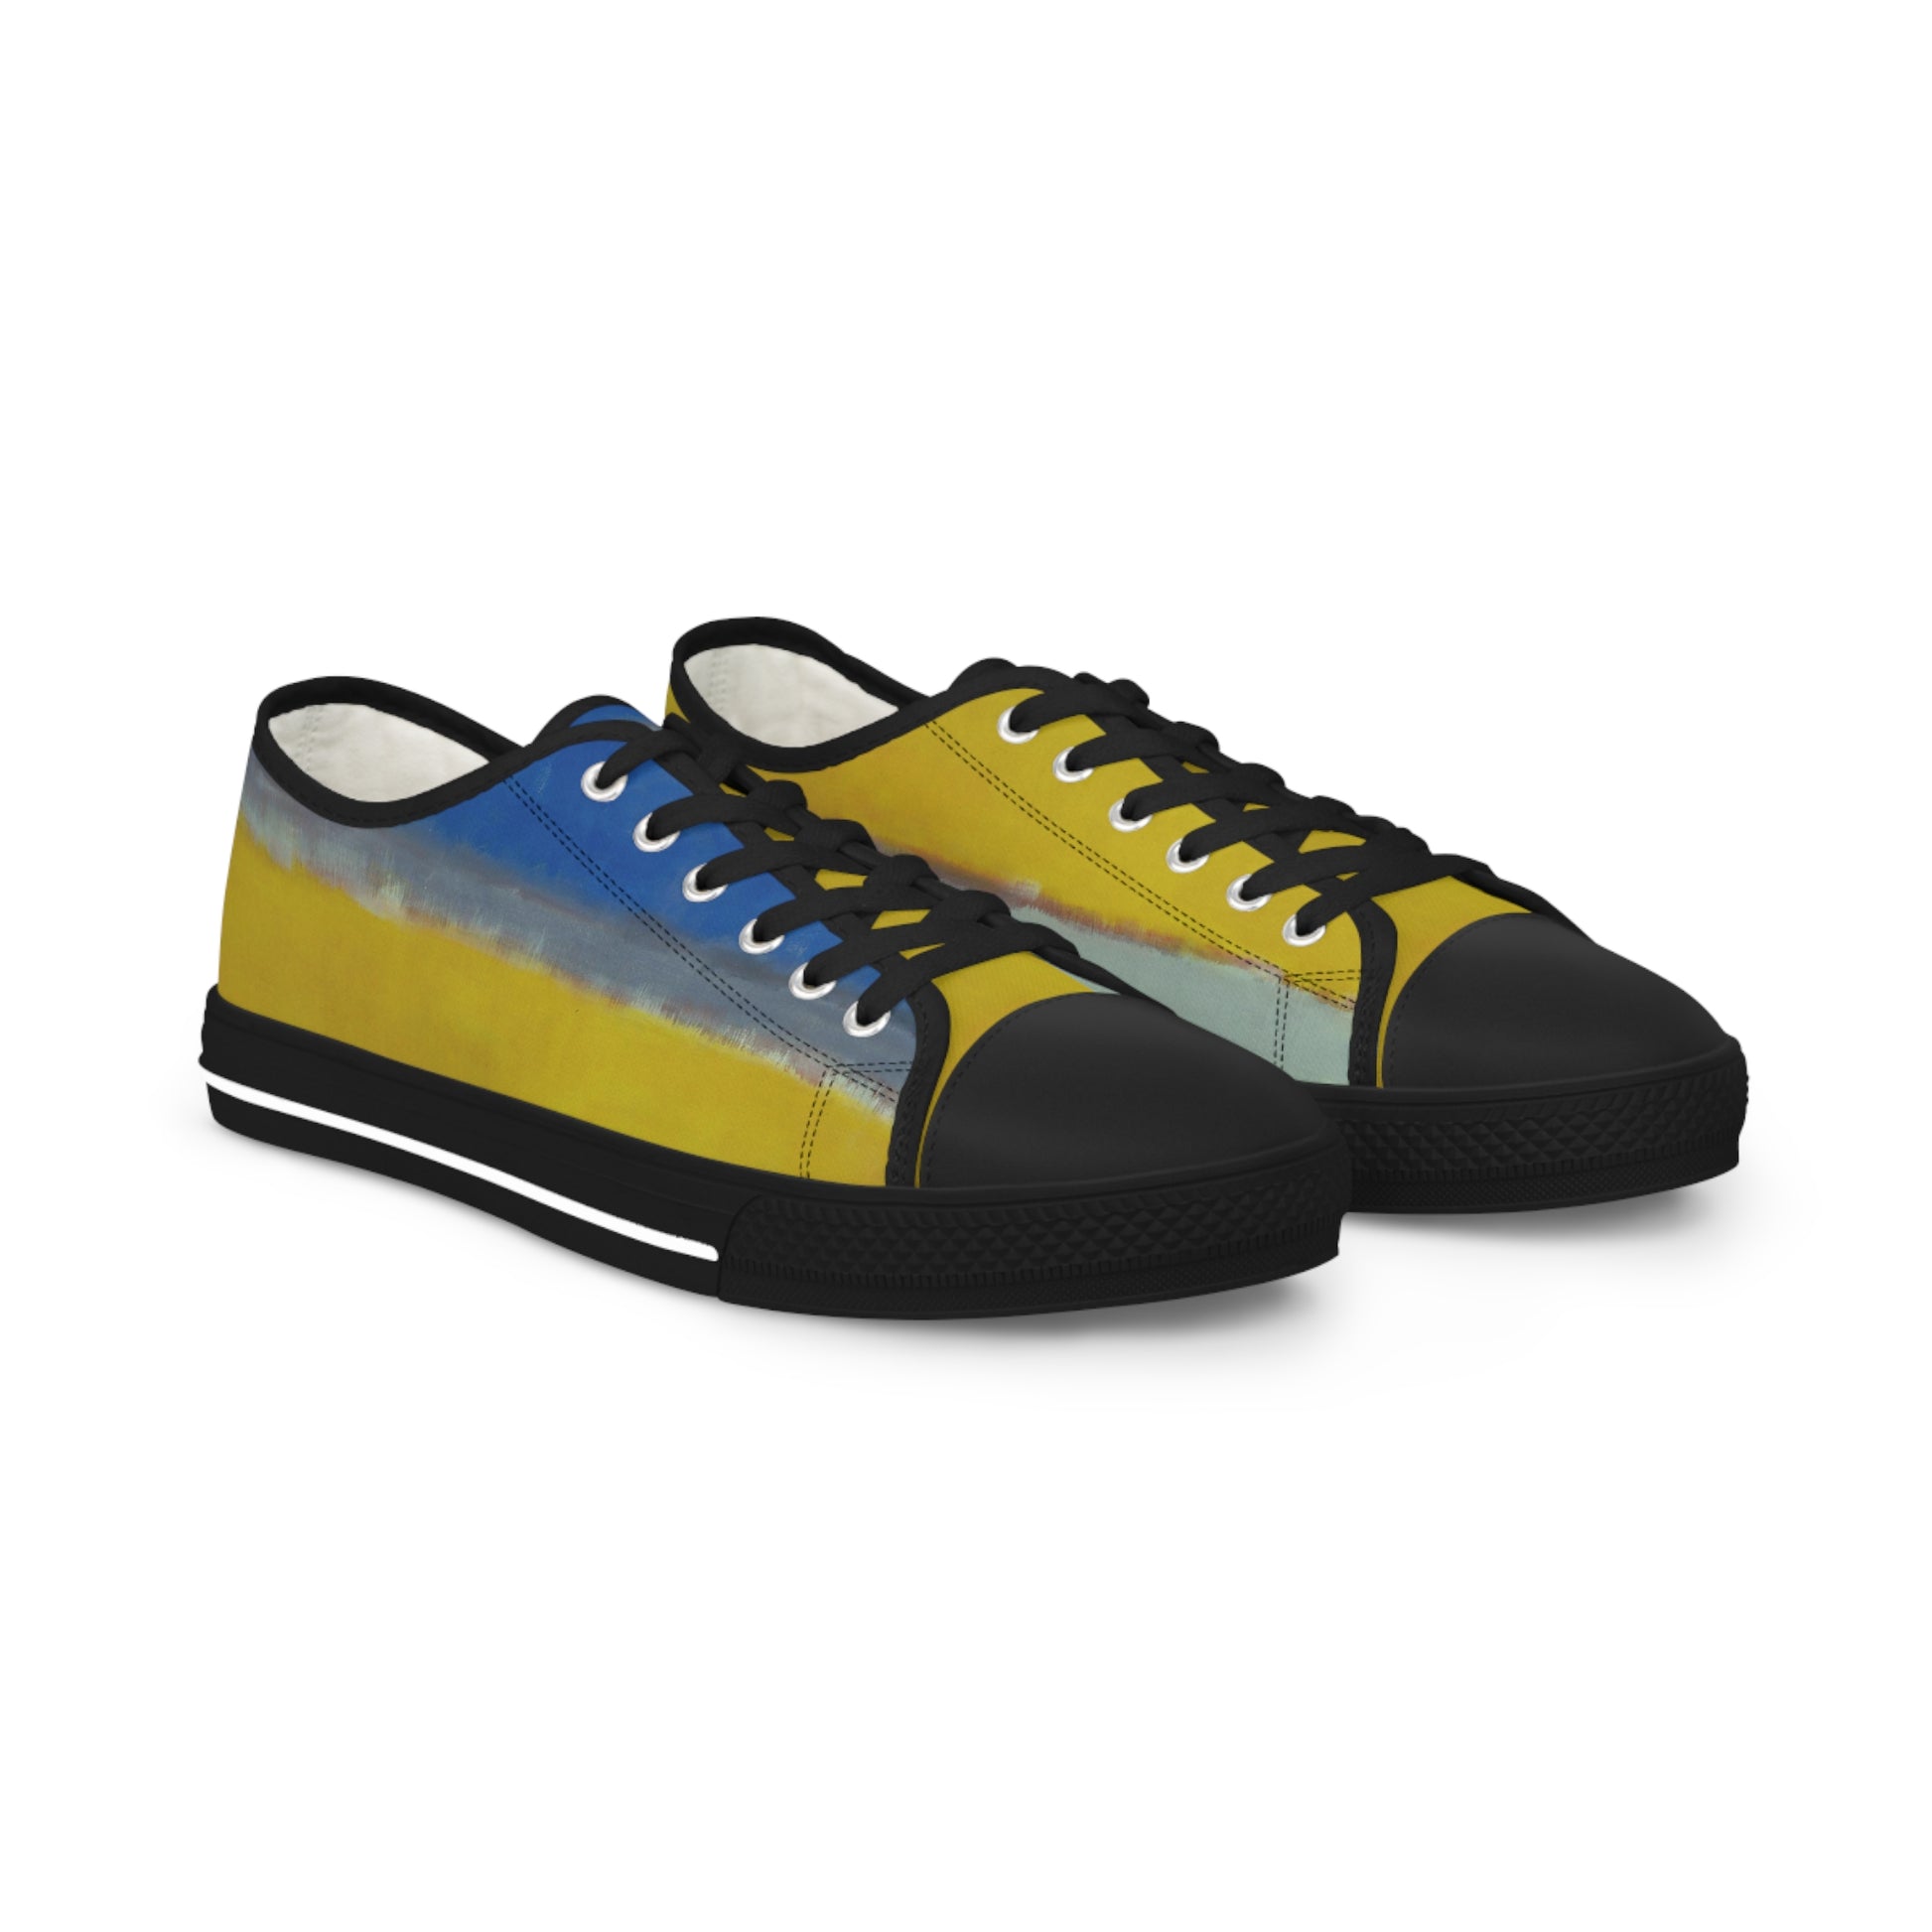 MARK ROTHKO - ABSTRACT - LOW TOP ART SNEAKERS FOR HIM